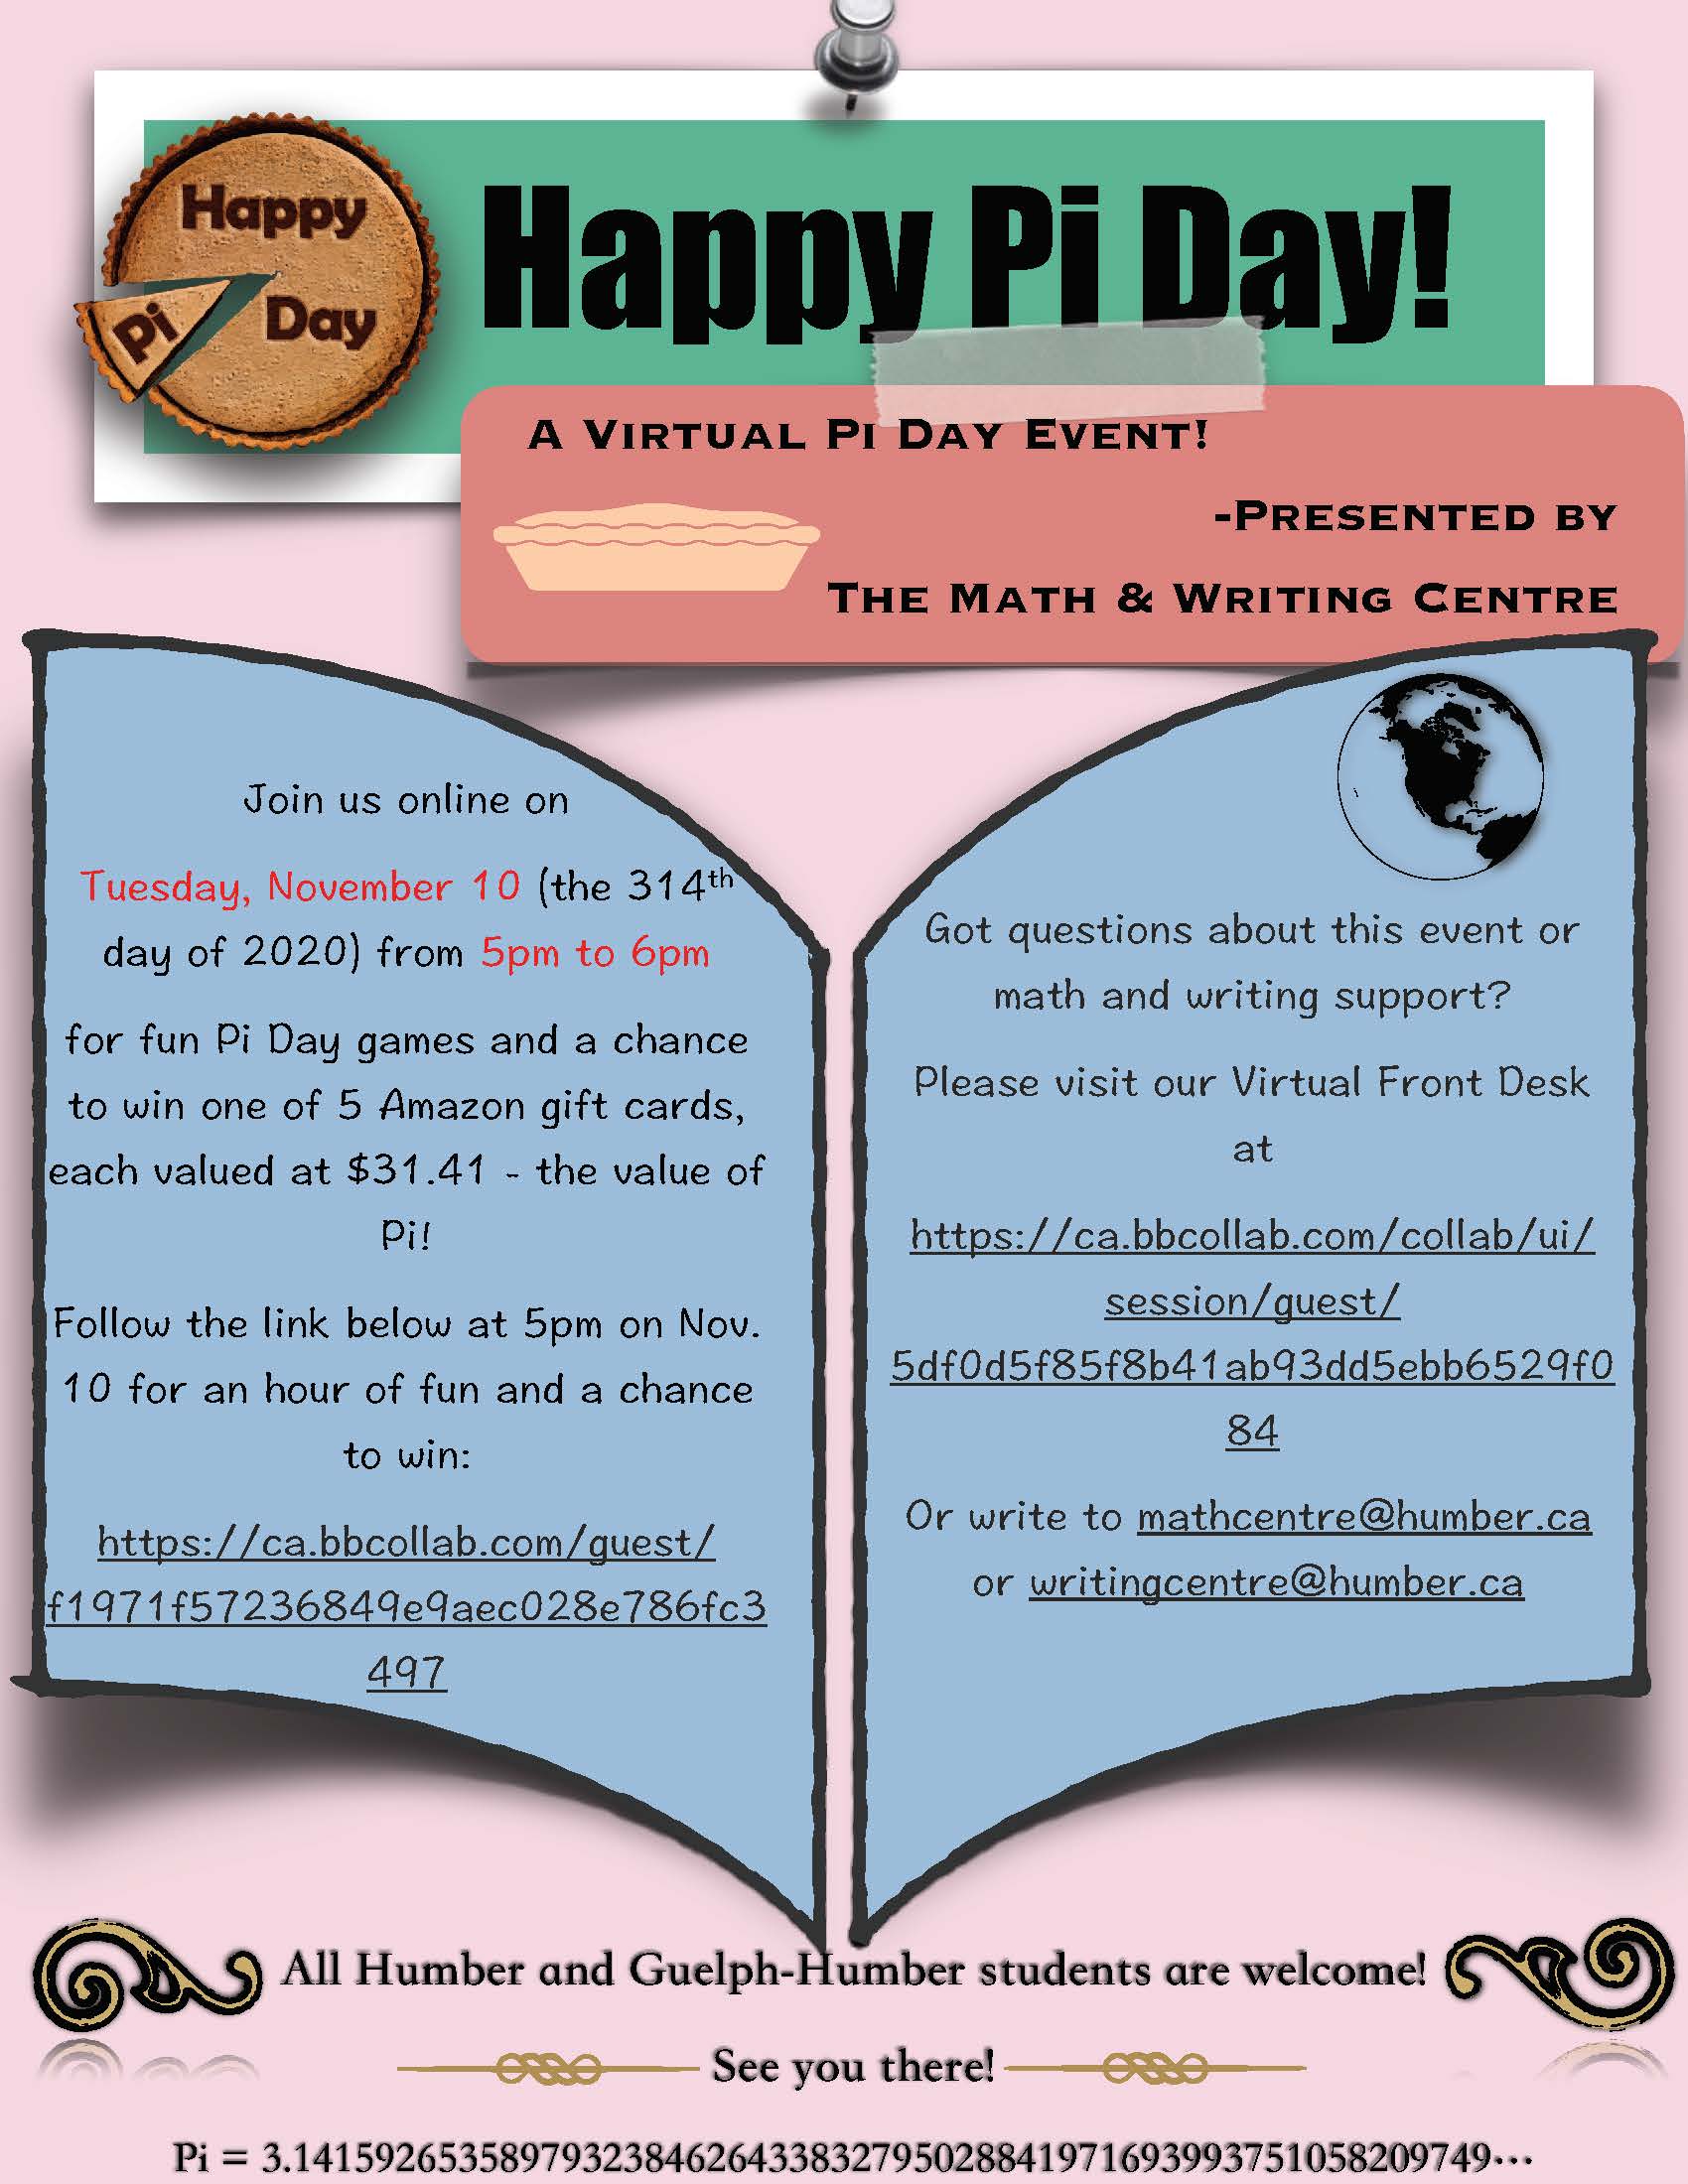 Happy Pi Day! A Virtual Pi Day Event! Presented by The Math & Writing Centre   Join us online on Tuesday, November 10 (the 314th day of 2020) from 5pm to 6pm for fun Pi Day games and a chance to win one of 5 Amazon gift cards, each valued at $31.41 - the value of Pi! Follow the link below at 5pm on Nov. 10 for an hour of fun and a chance to win: https://ca.bbcollab.com/guest/f1971f57236849e9aec028e786fc3497  Got questions about this event or math and writing support? Please visit our Virtual Front Desk at  